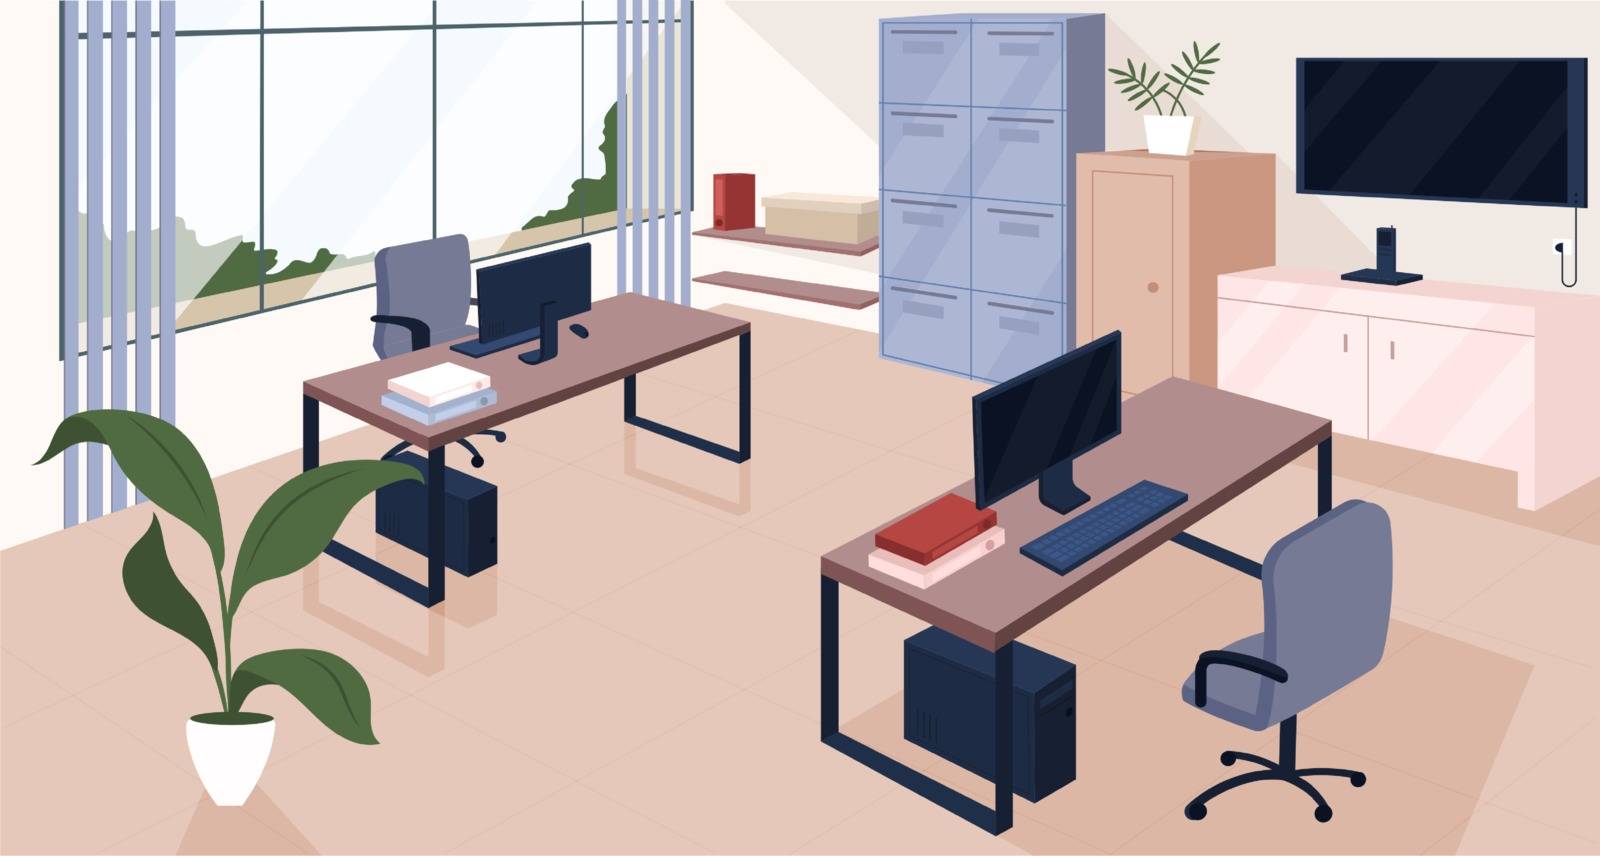 Coworking space flat color vector illustration. Modern open space office, cozy business office 2D cartoon interior design with furniture on background. Shared corporate workplace decor